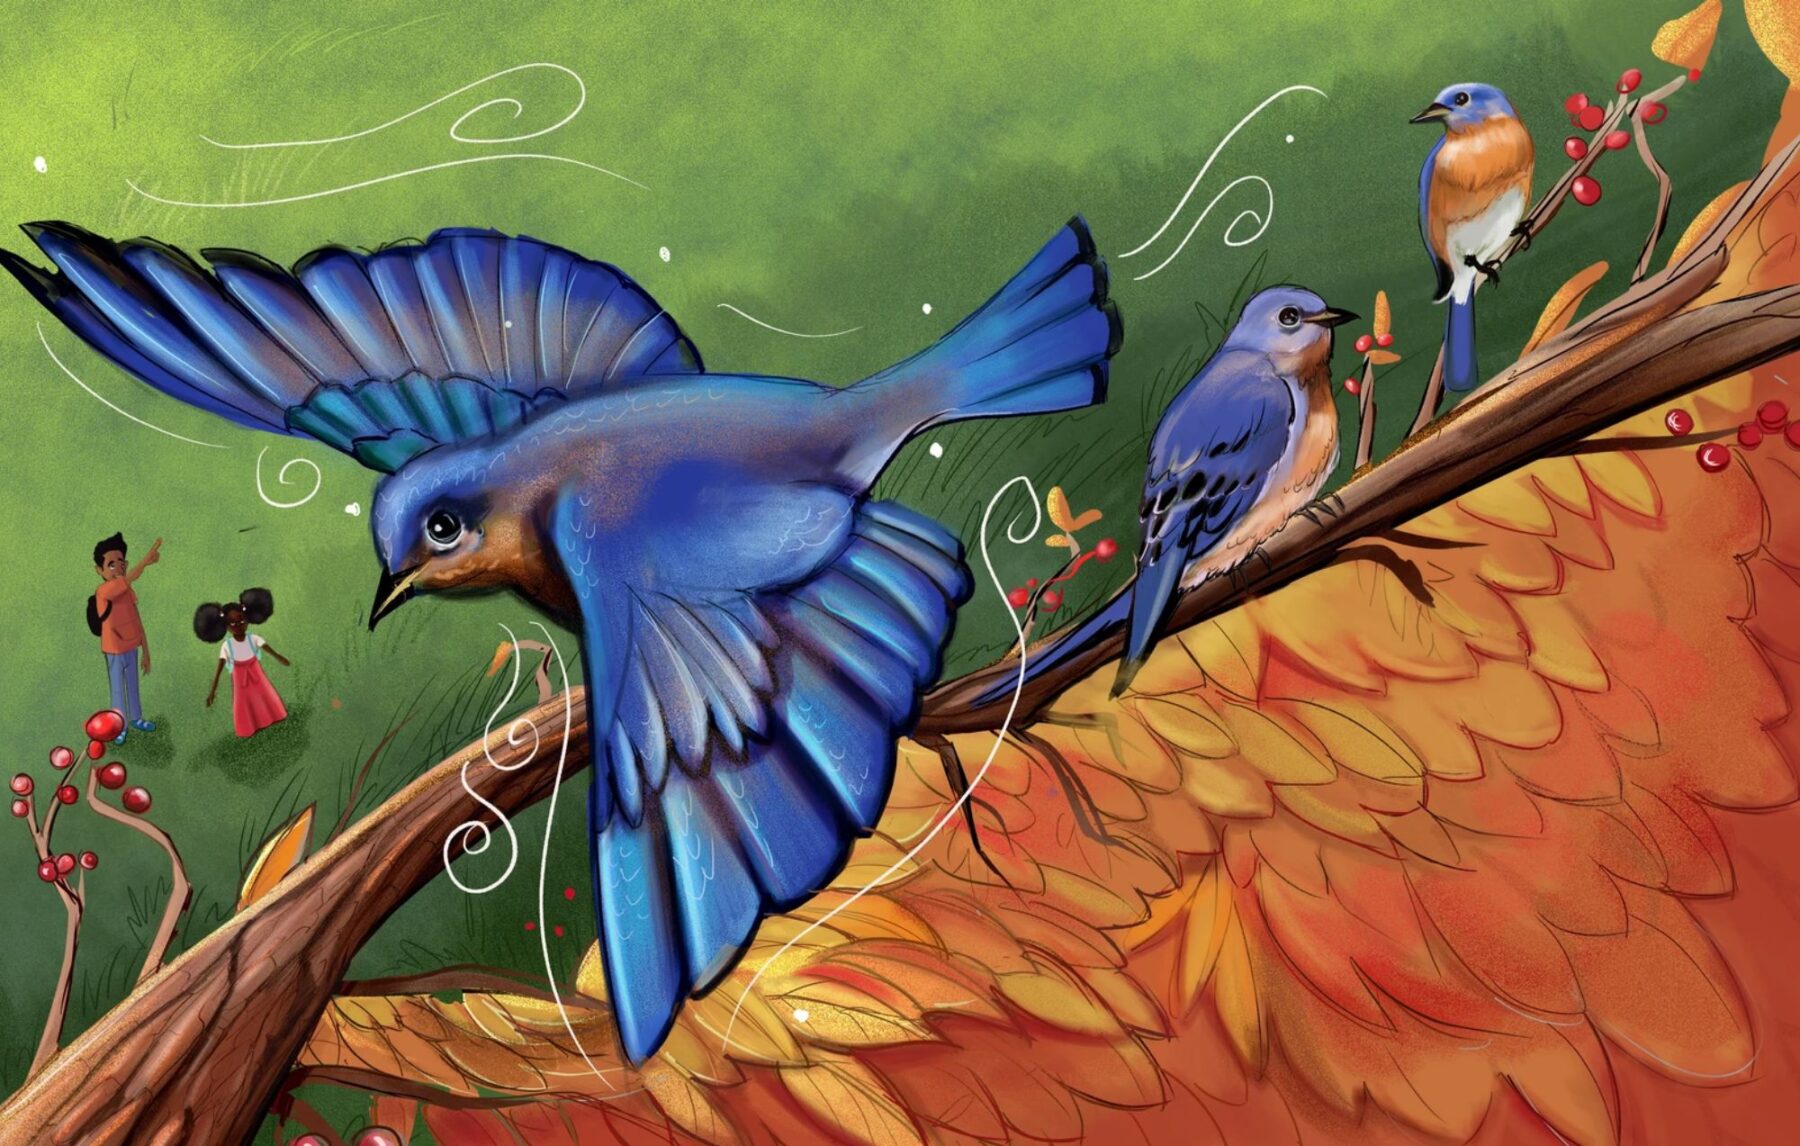 Blue bird flying over a small family